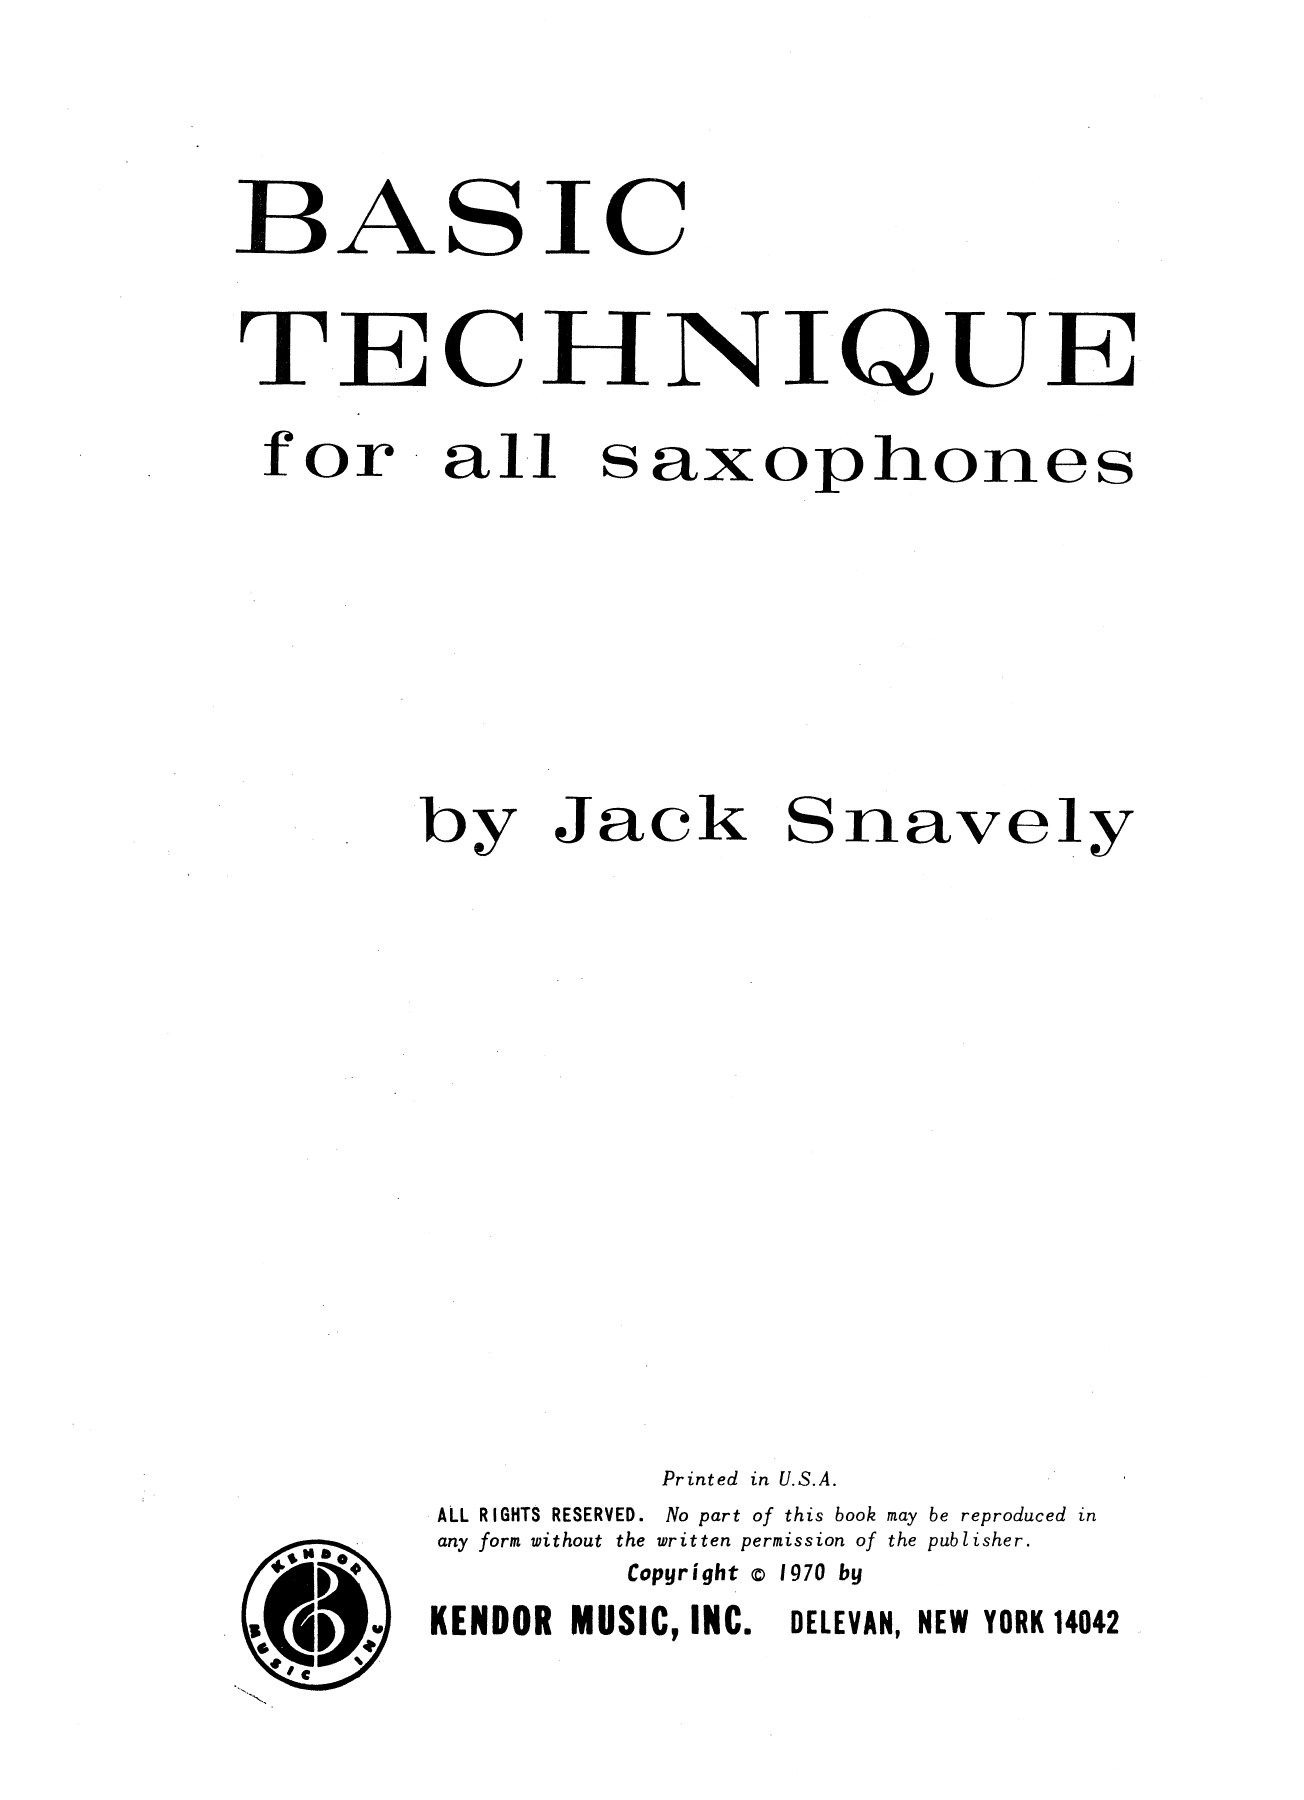 Download Jack Snavely Basic Technique For All Saxophones Sheet Music